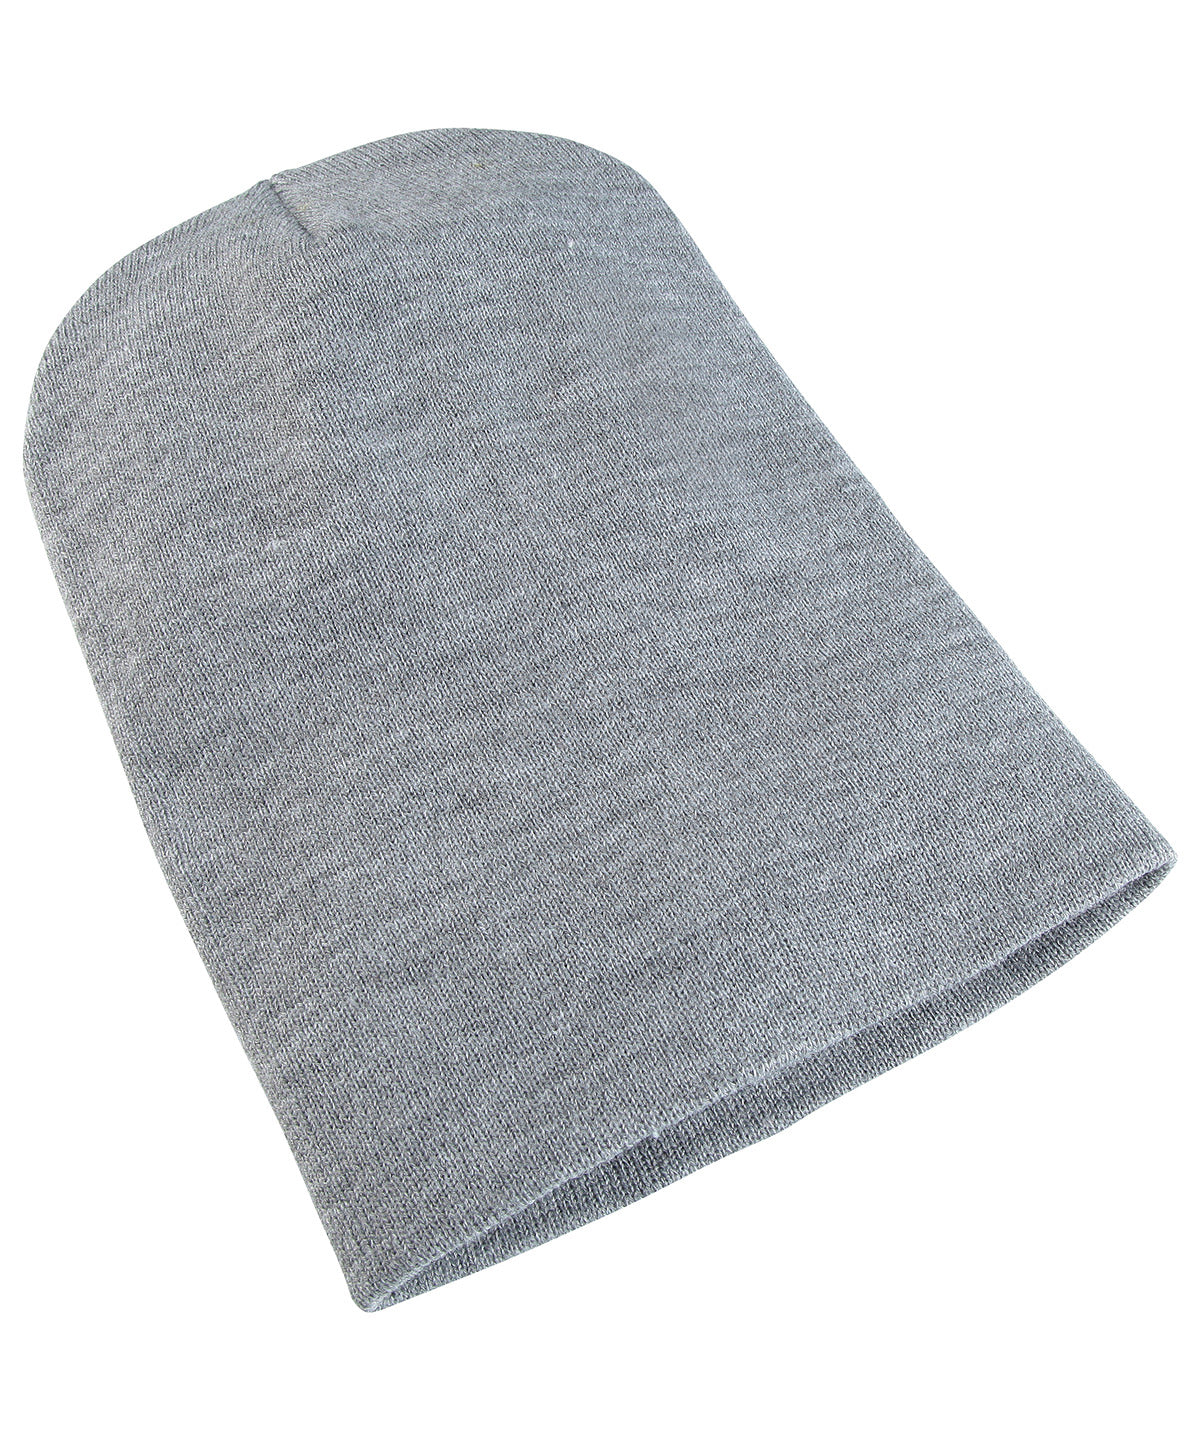 Heather Grey - Heavyweight long beanie (1501KC) Hats Flexfit by Yupoong Headwear, Must Haves, New Colours for 2023, Winter Essentials Schoolwear Centres